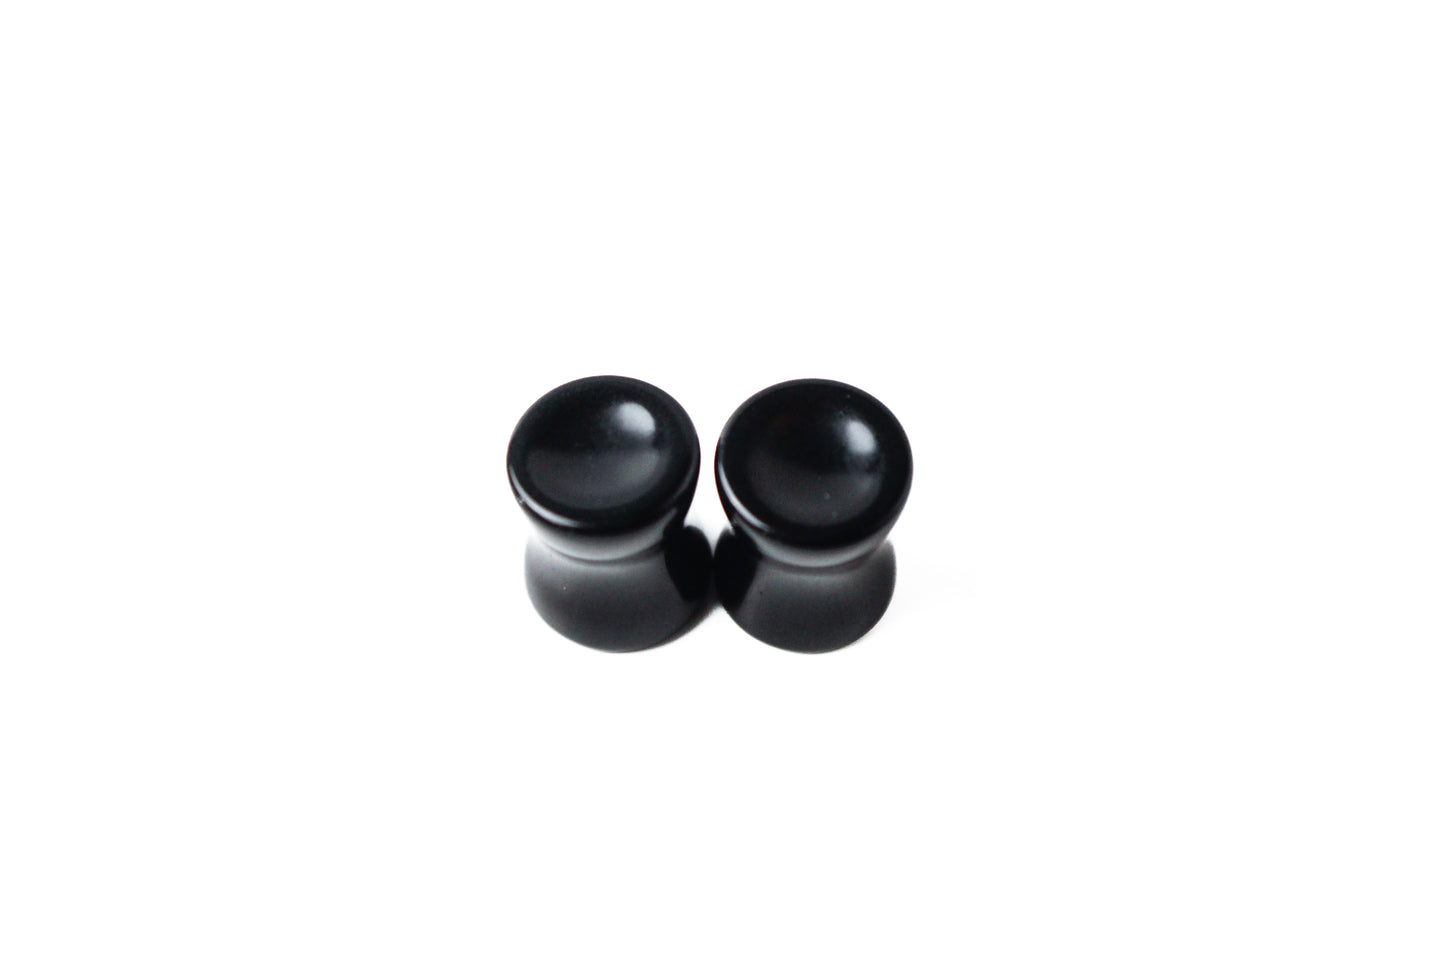 0G (8mm) - Black Obsidian Concave Plugs